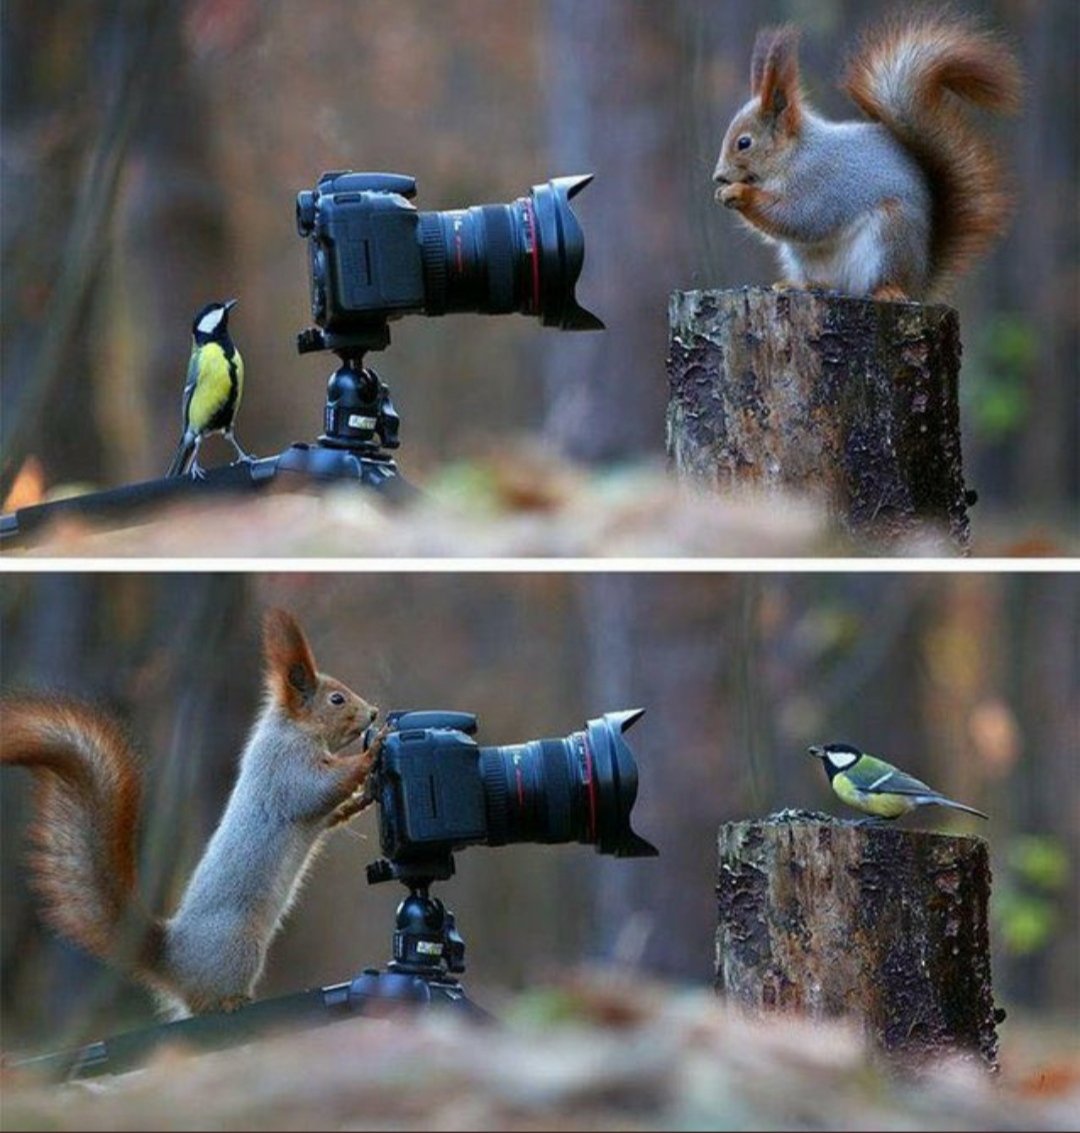 These 2 frames captured by the Russian photographer Vadim Trunov may be the cutest photos of all time.